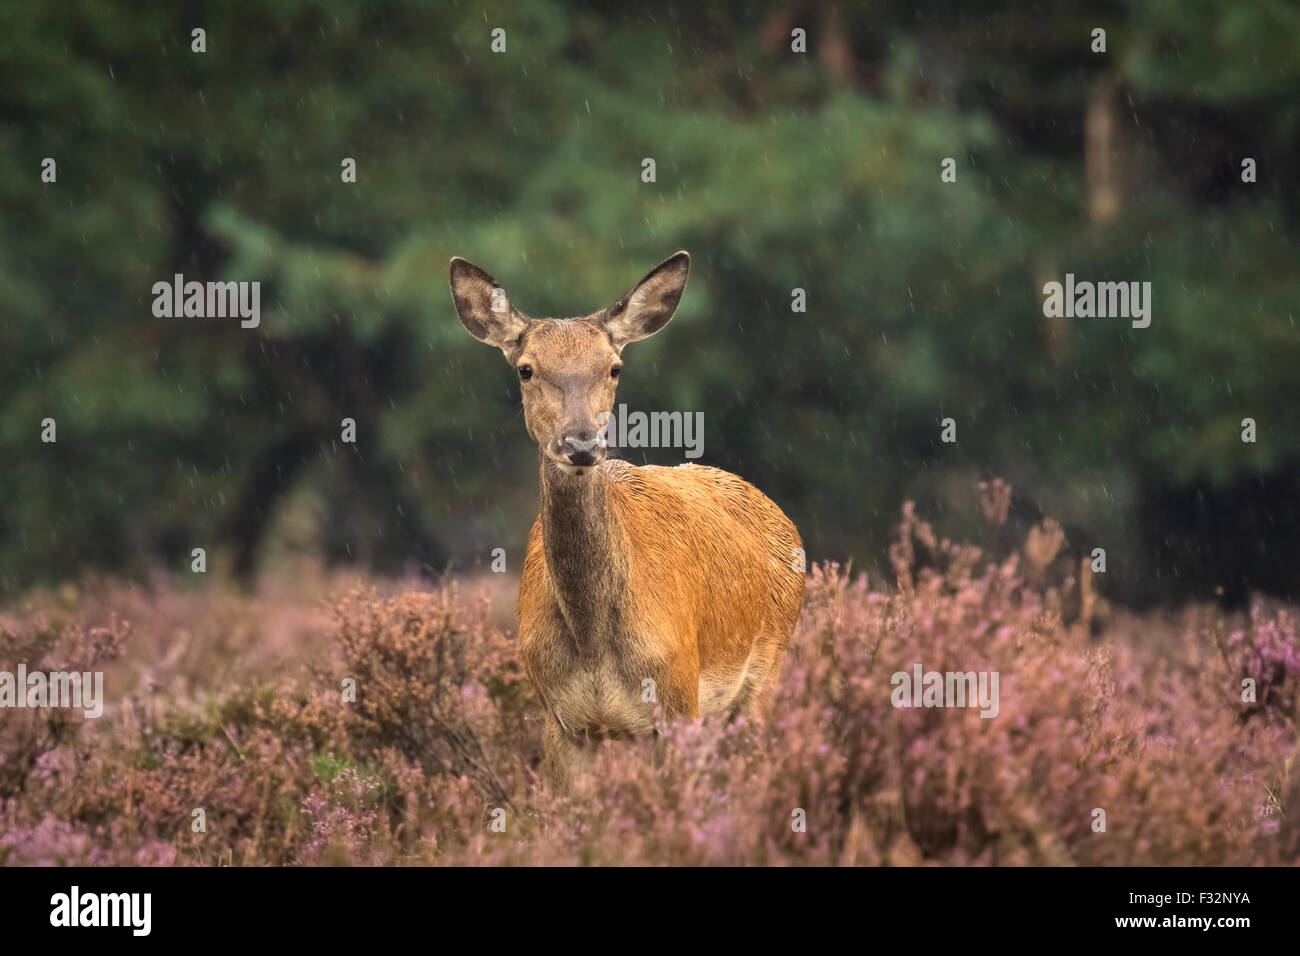 Female Red Deer (Cervus elaphus) in a meadow with purple heather in front of a forest on a rainy day. Stock Photo